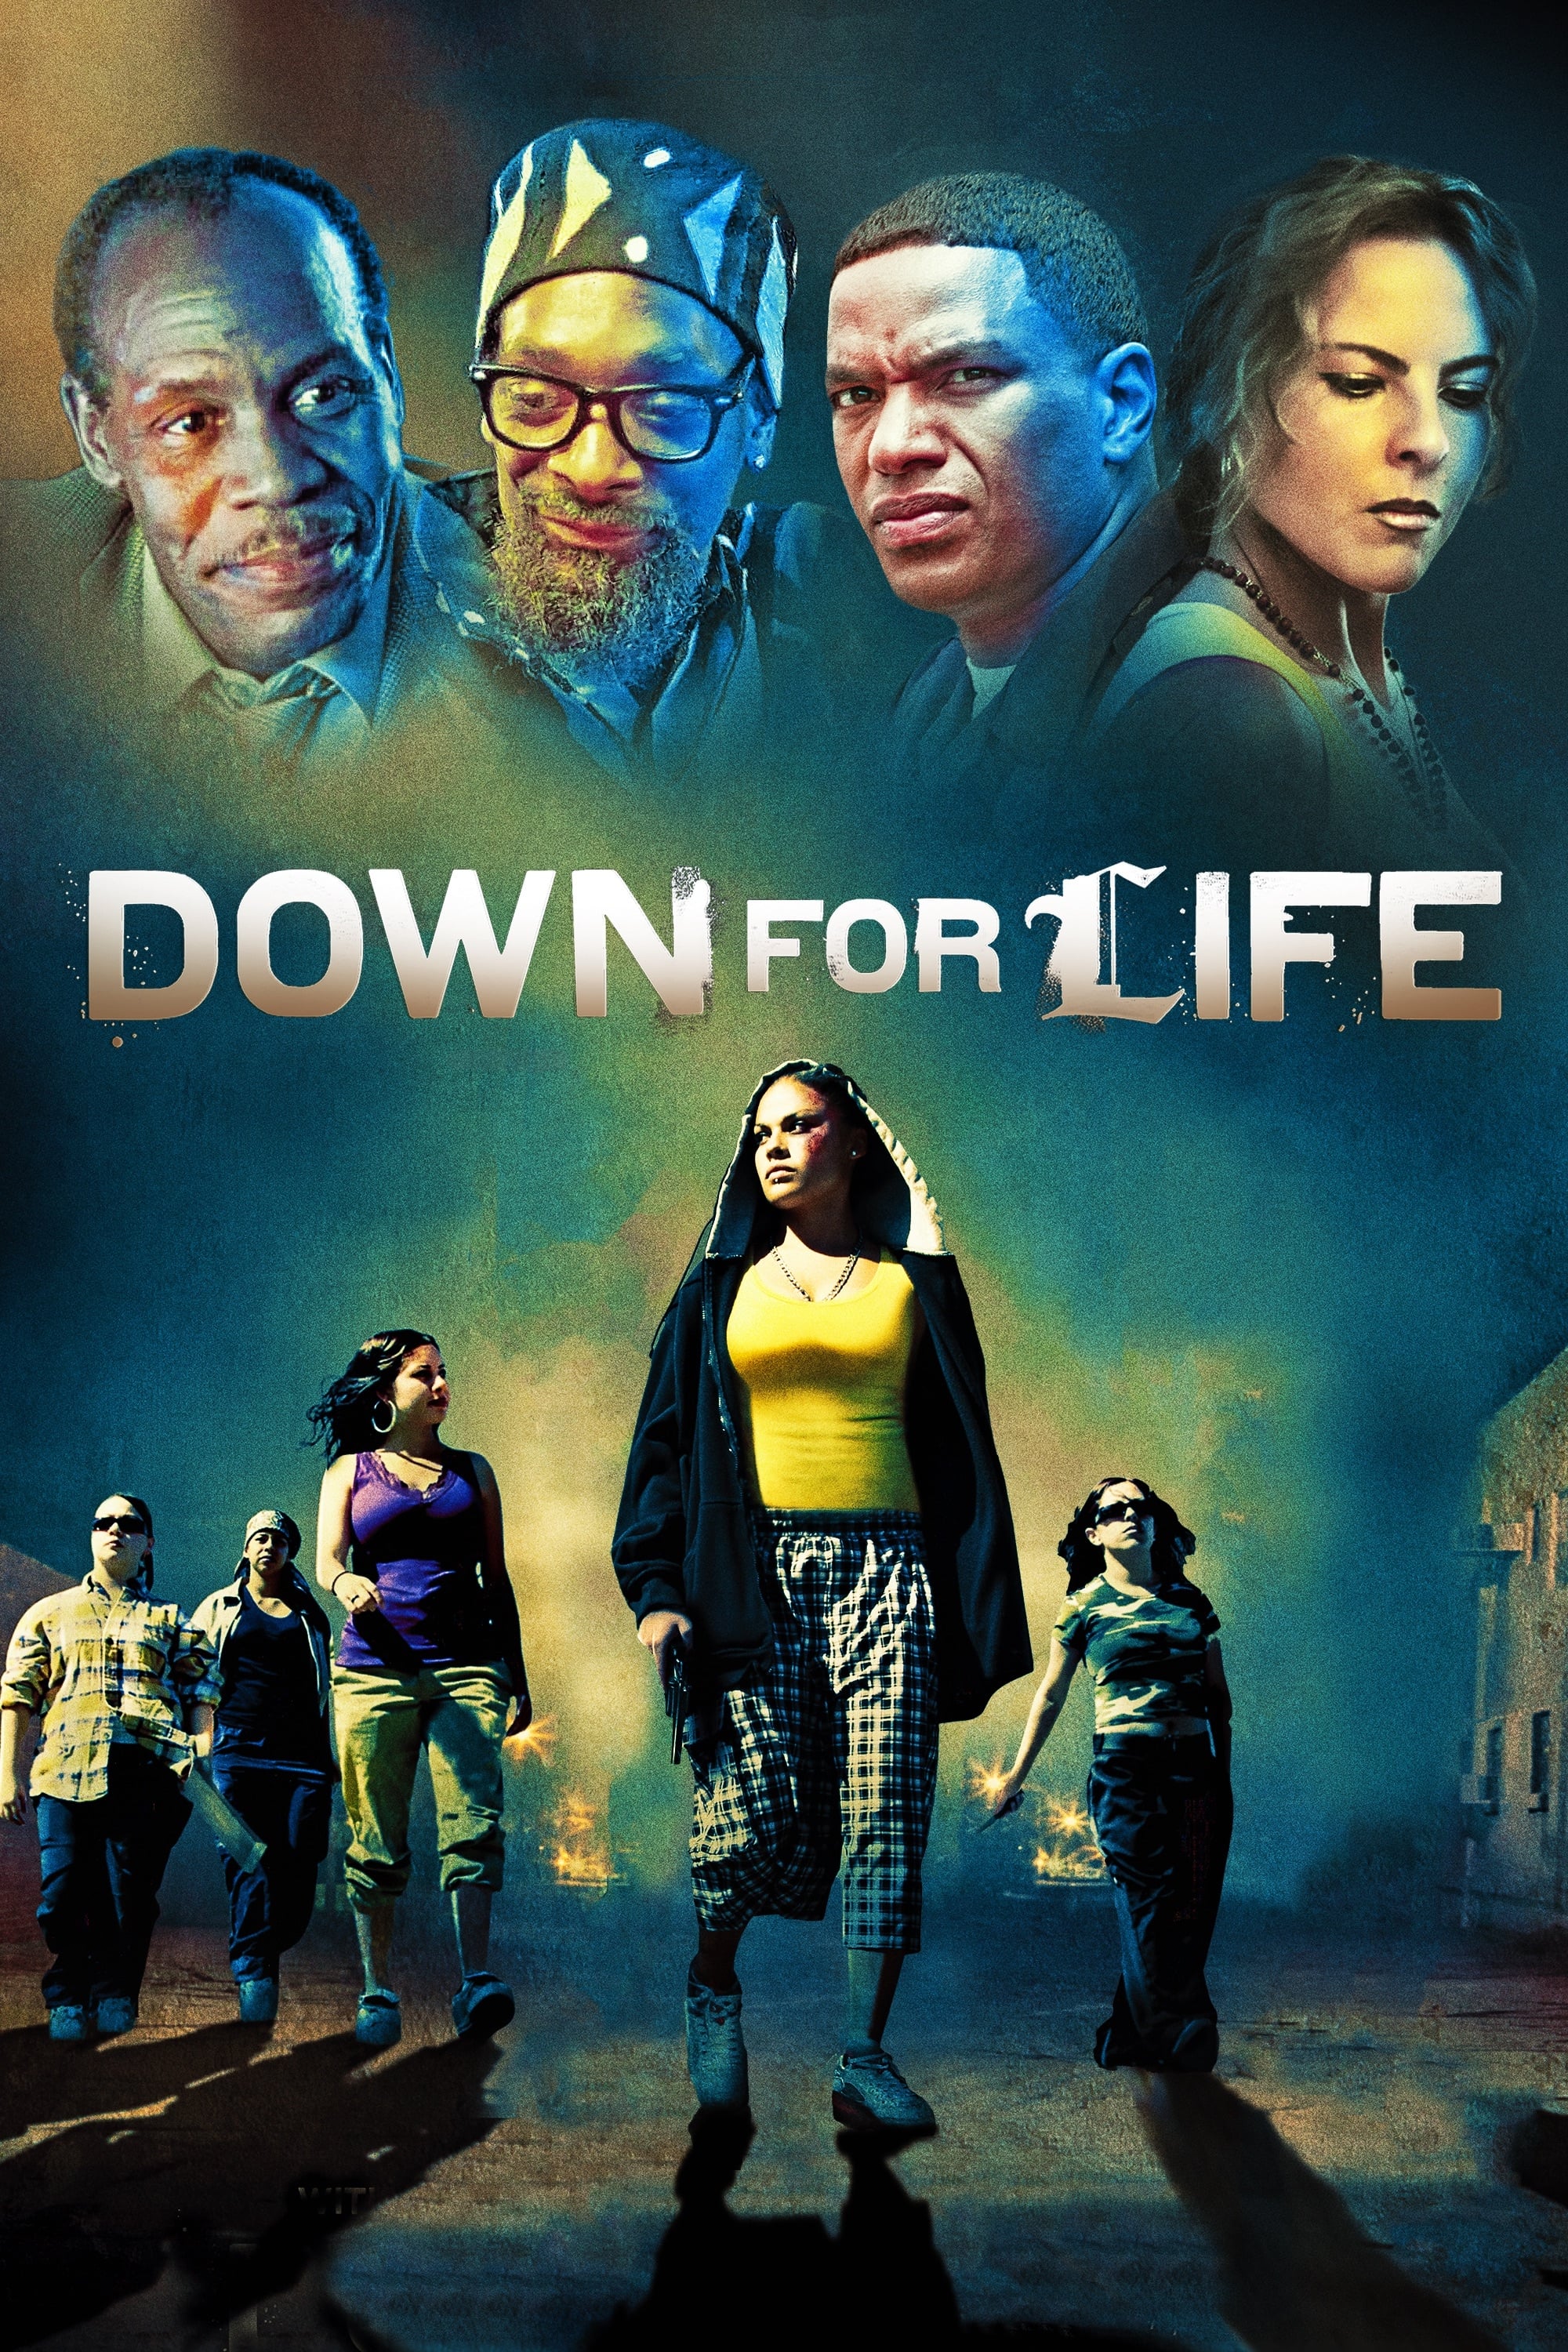 Down for Life film